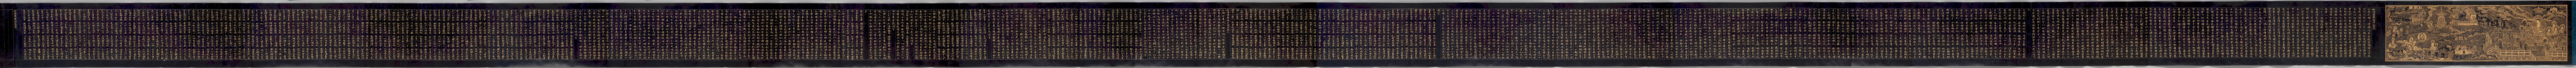 Frontispiece for the Lotus Sutra, 1100s. China, Song dynasty (960-1279). Handscroll, gold ink on